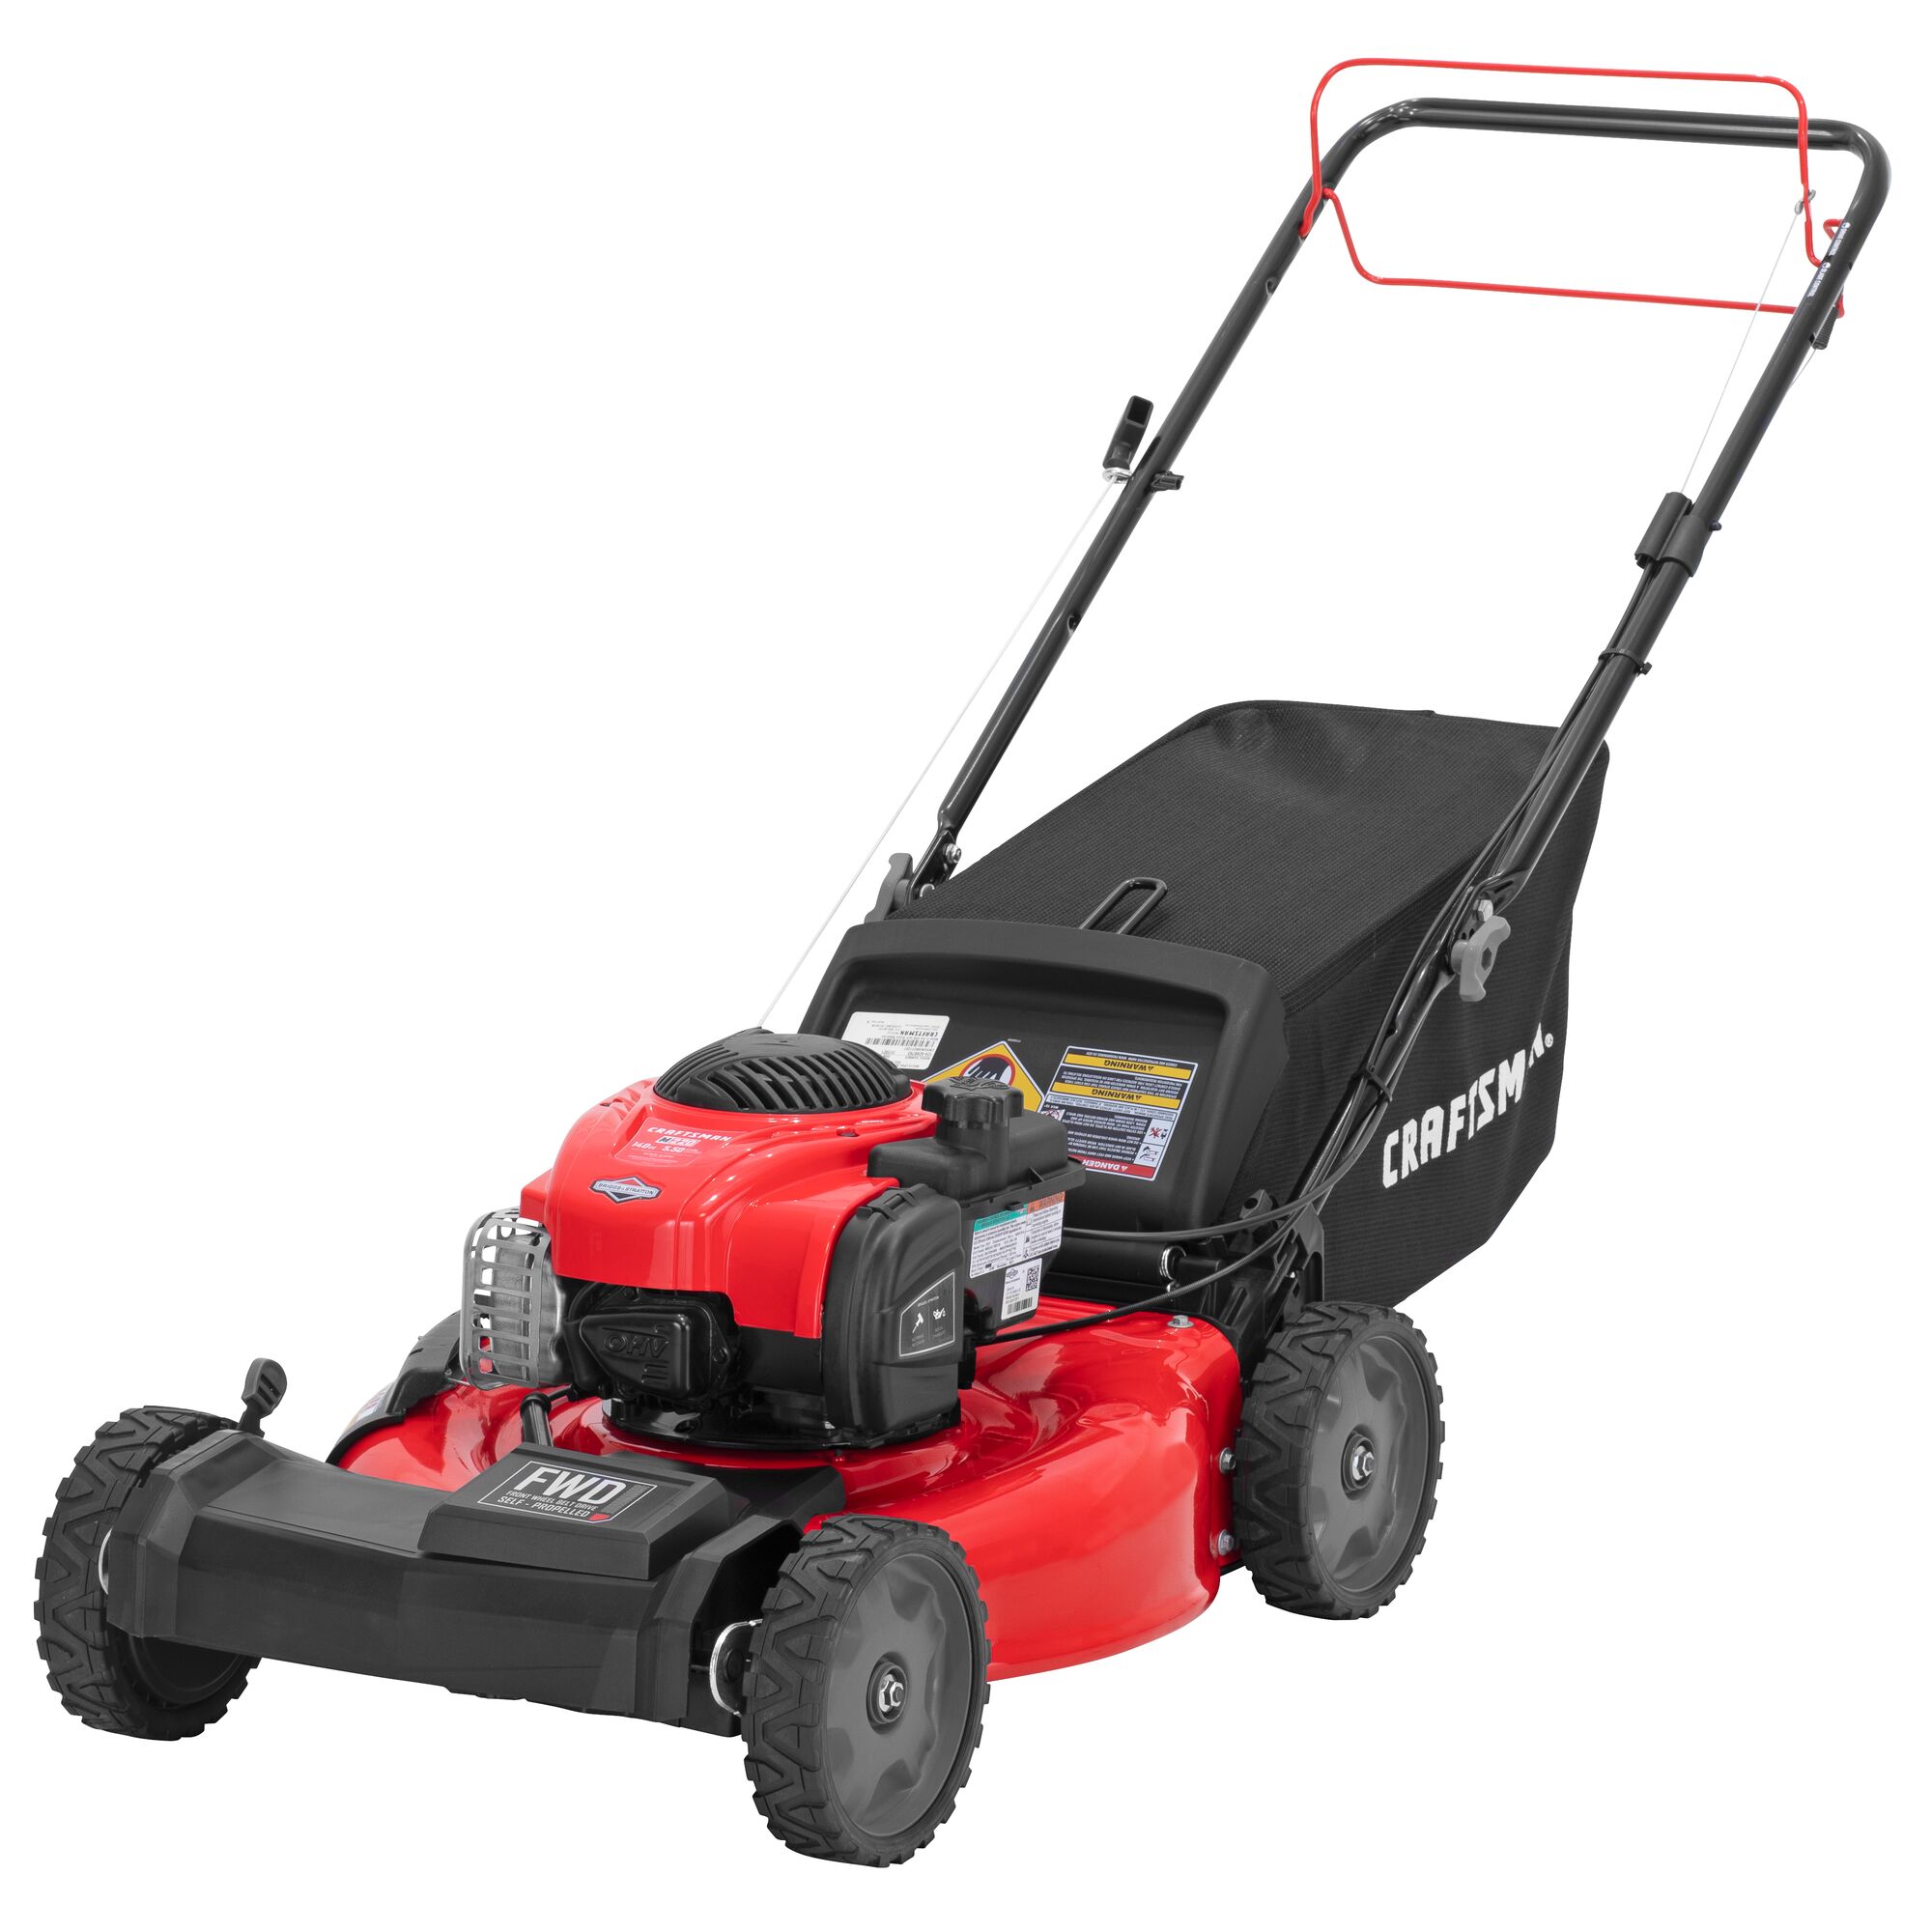 M220 140-cc 21-in Self-propelled Gas Push Lawn Mower with Briggs & Stratton 140cc Engine